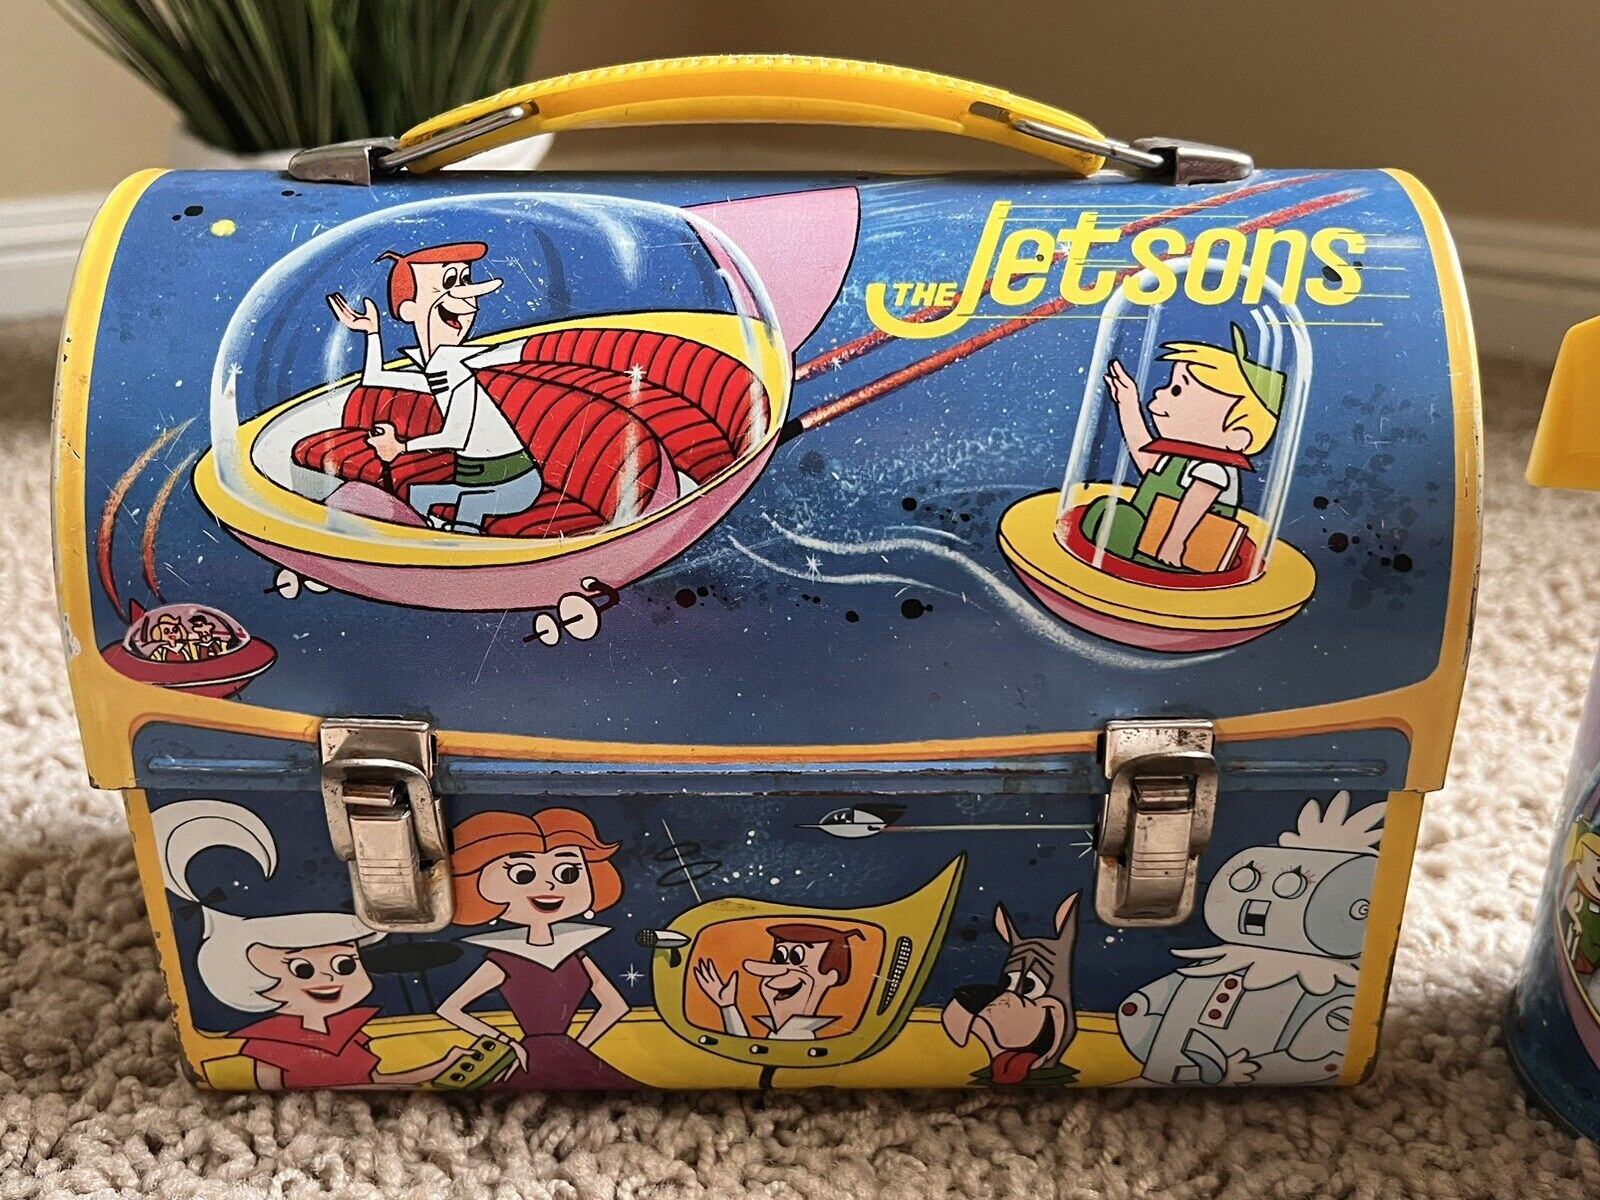 1963 Jetsons lunchbox vintage bright colors with hard to find thermos 